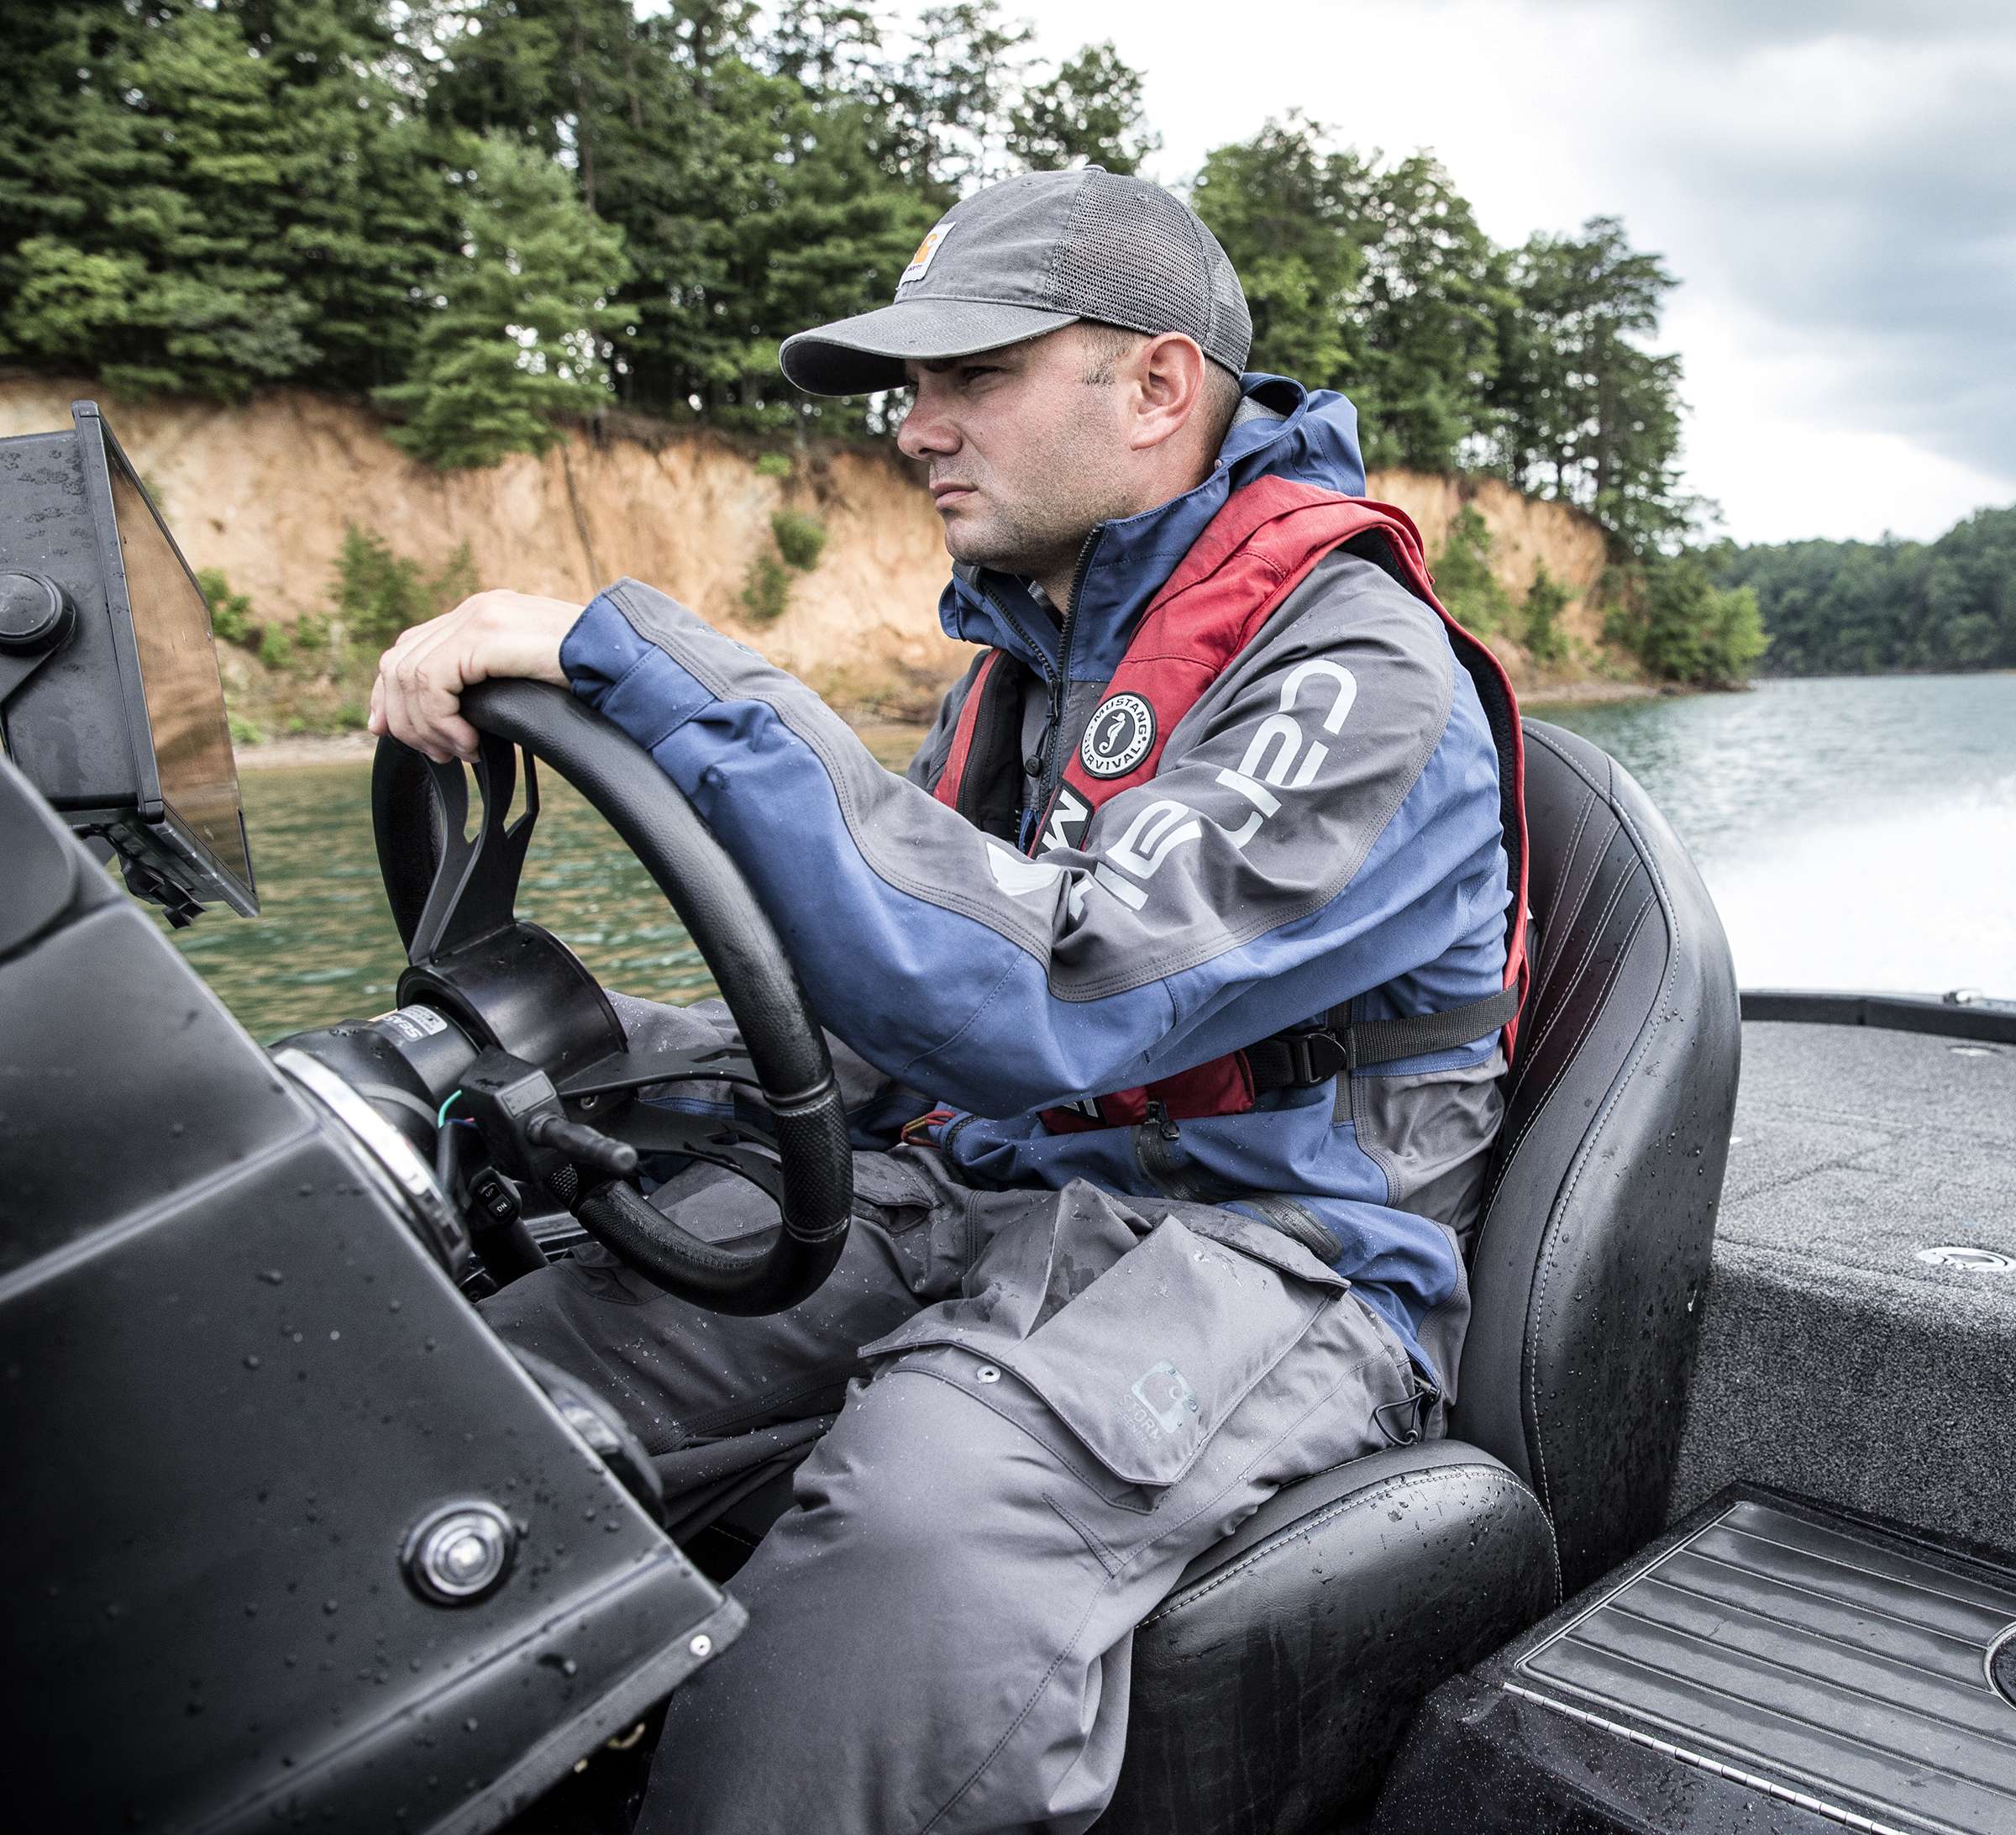 <b>2017:</b> Carhartt shows its dedication to anglers with the introduction of the Carhartt Fishing line. The companyâs legacy of hardworking, water repellent outdoor garments is taken to a whole new level with technologies like Force, Fastdry, and 37.5.